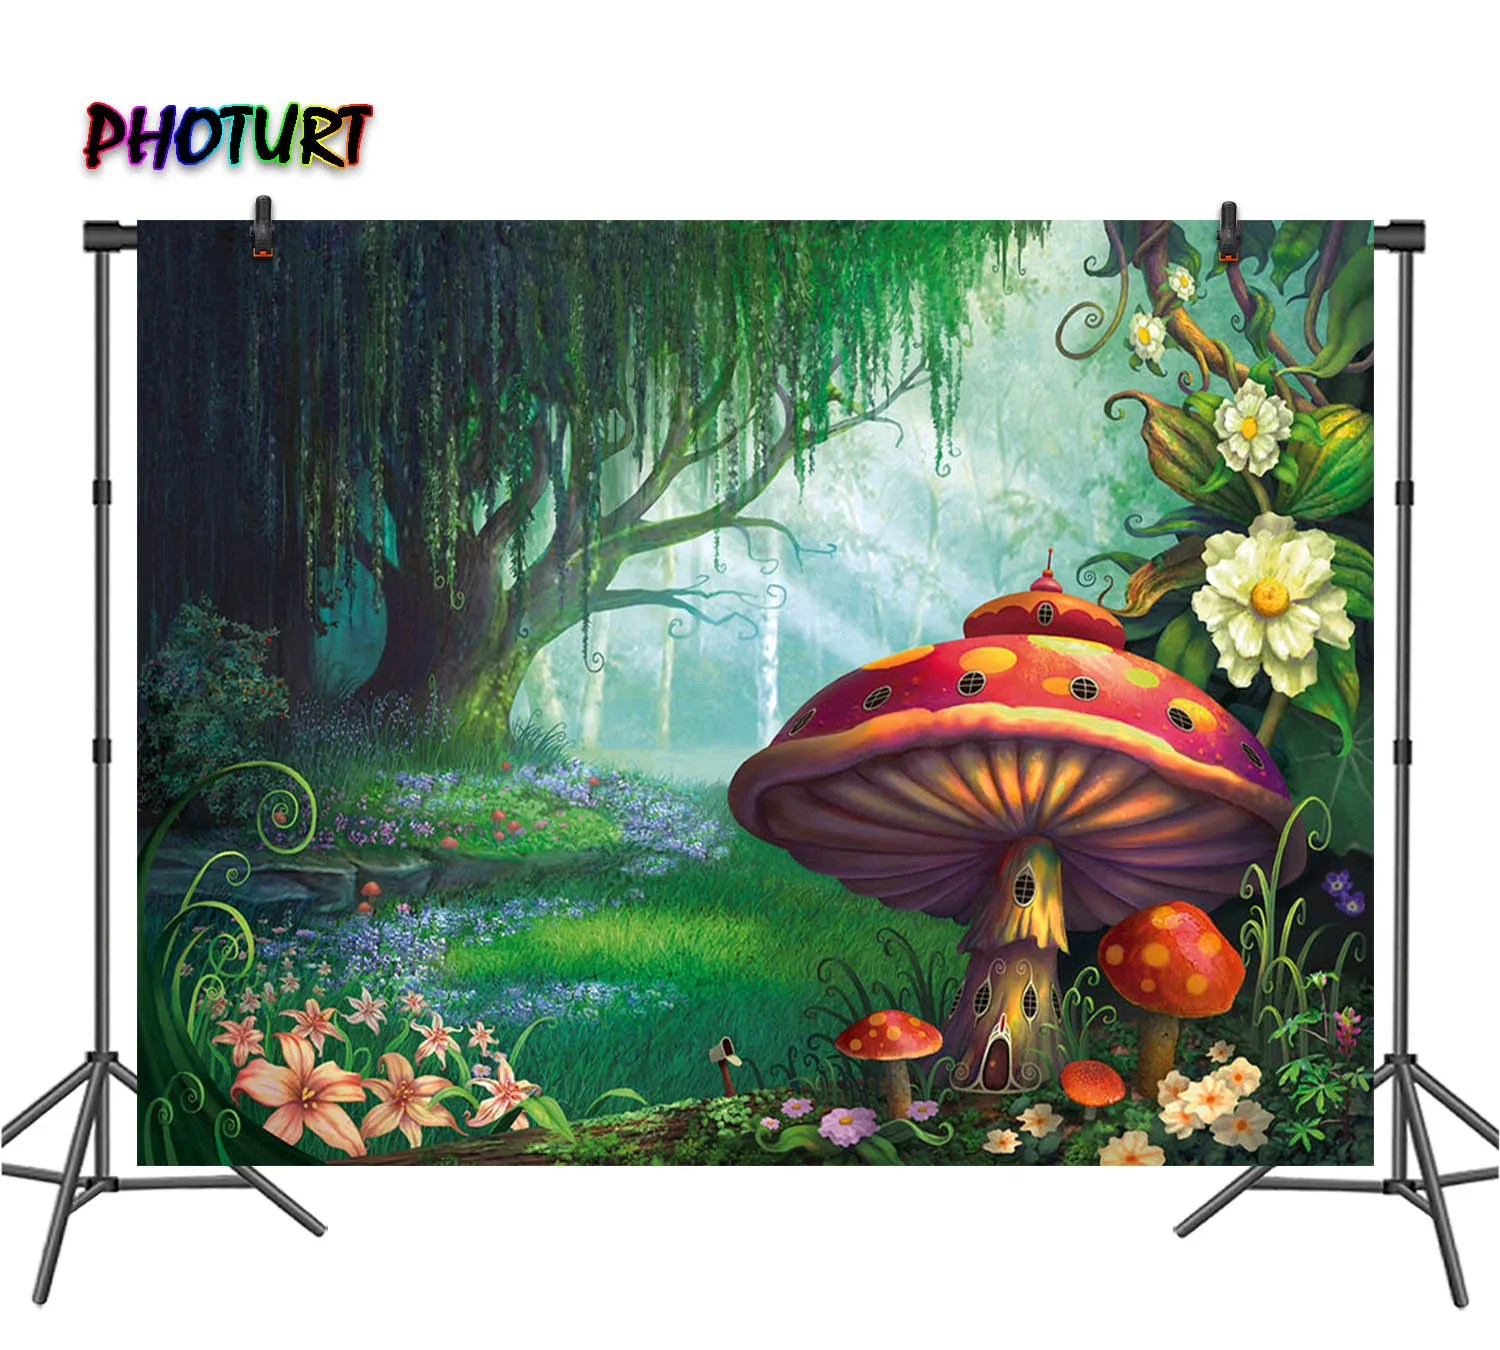 

PHOTURT Dream Forest Backdrop Kids Birthday Party Photography Background Mushroom House Photo Banner Polyester Vinyl Props